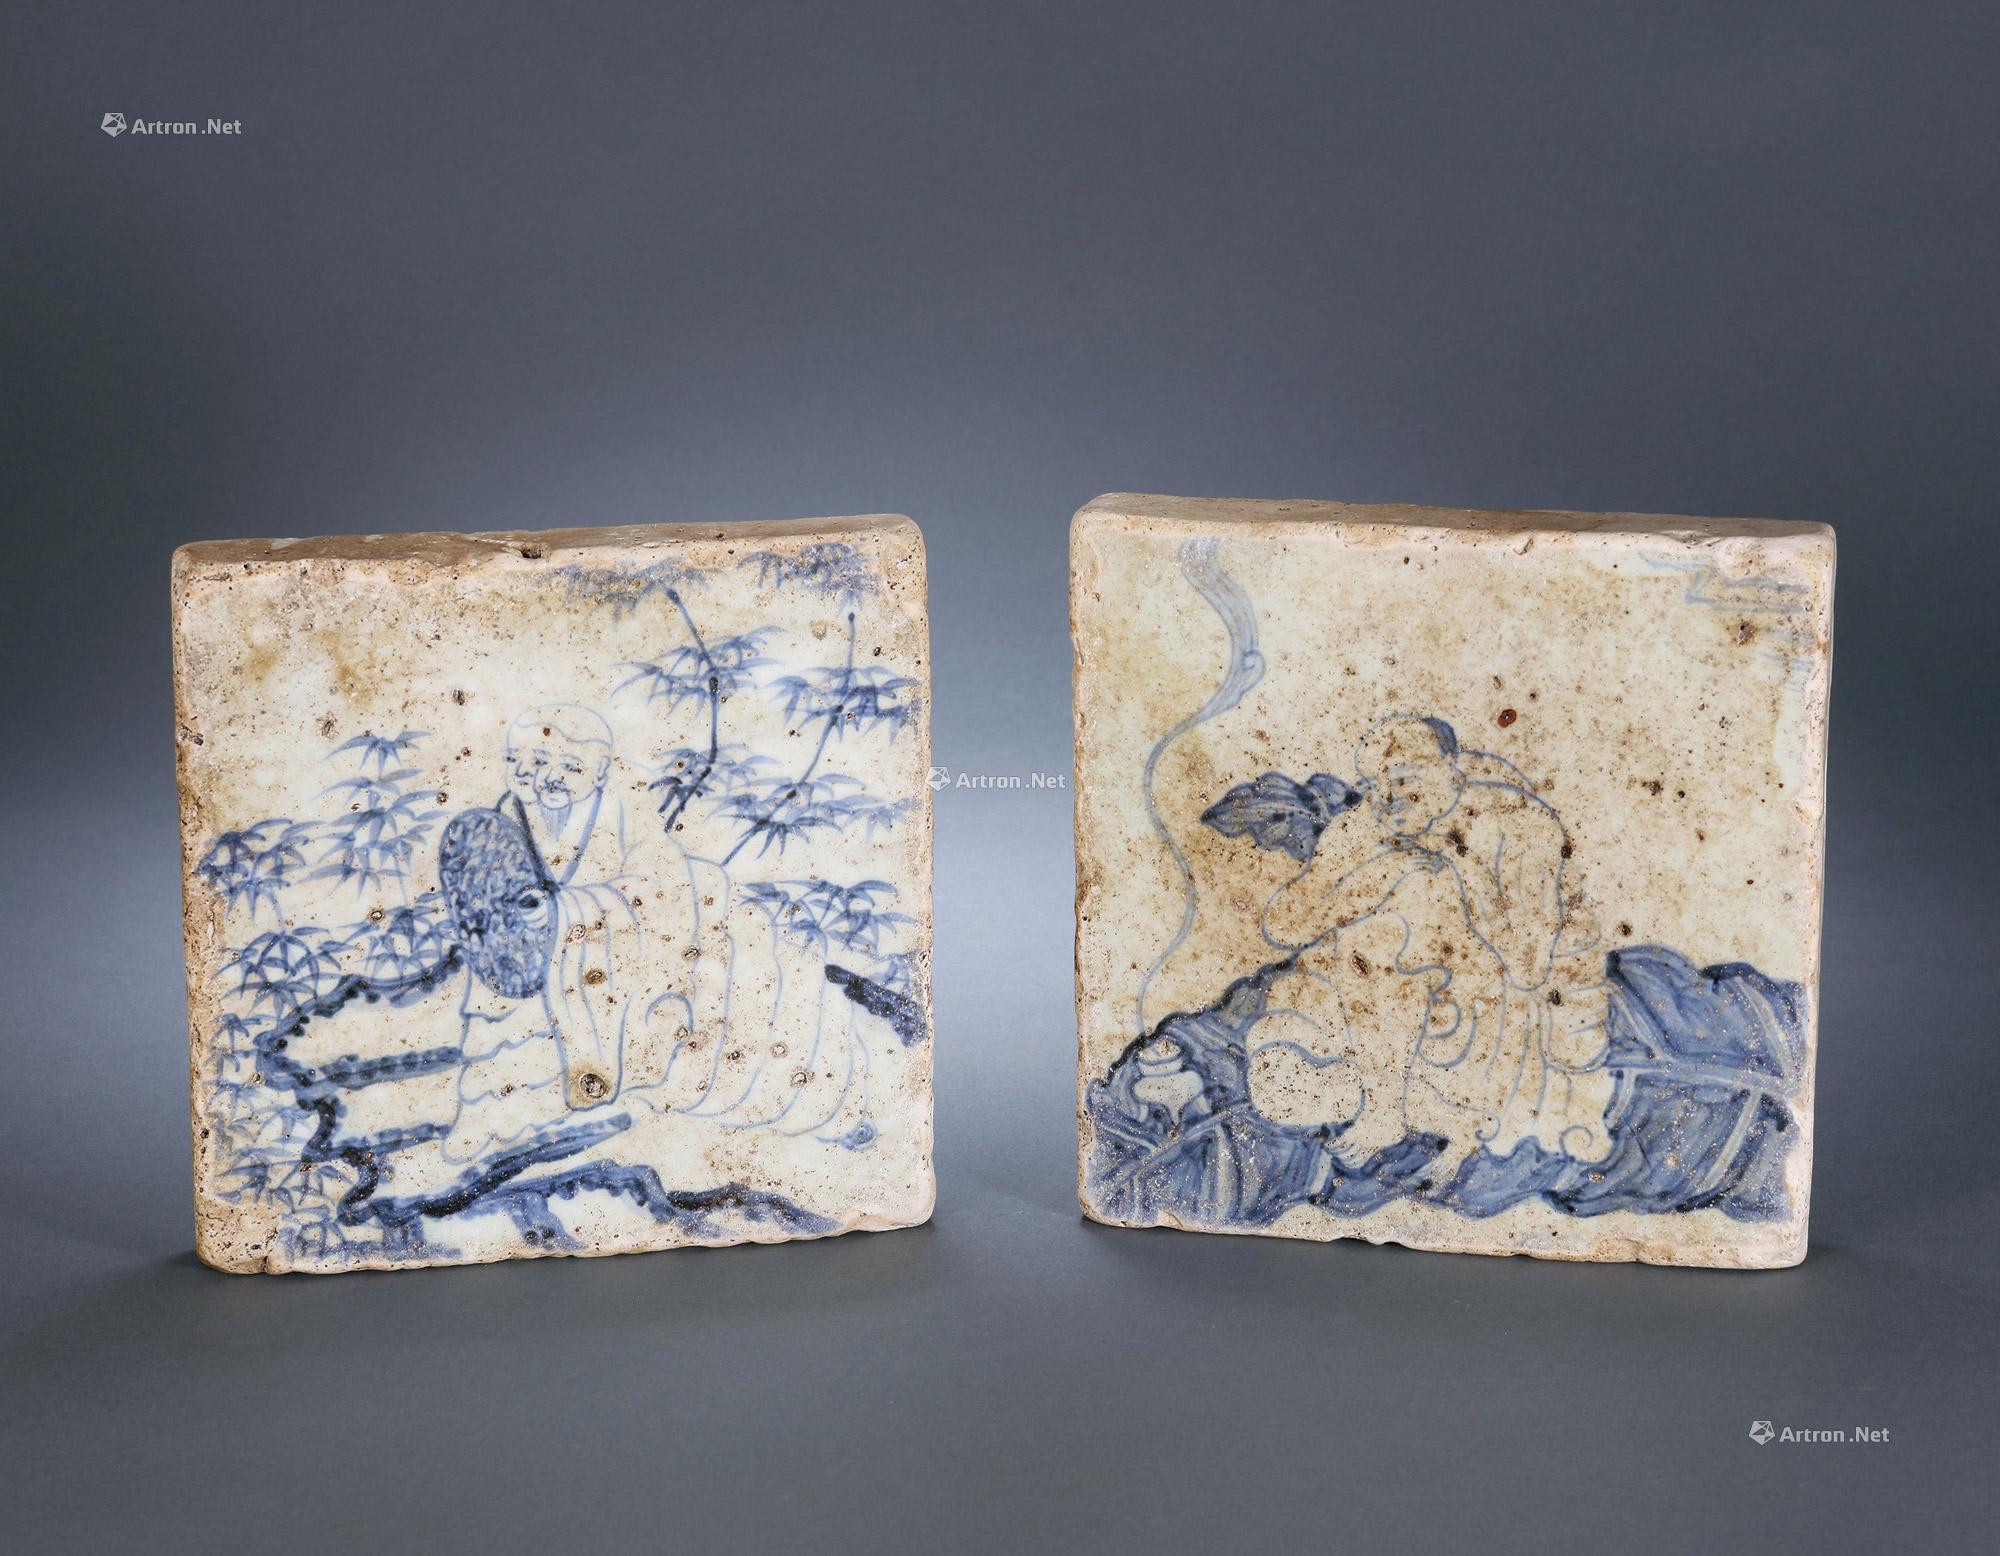 A SET OF TWO BLUE AND WHITE CERAMIC TILES WITH ARHATS DESIGN